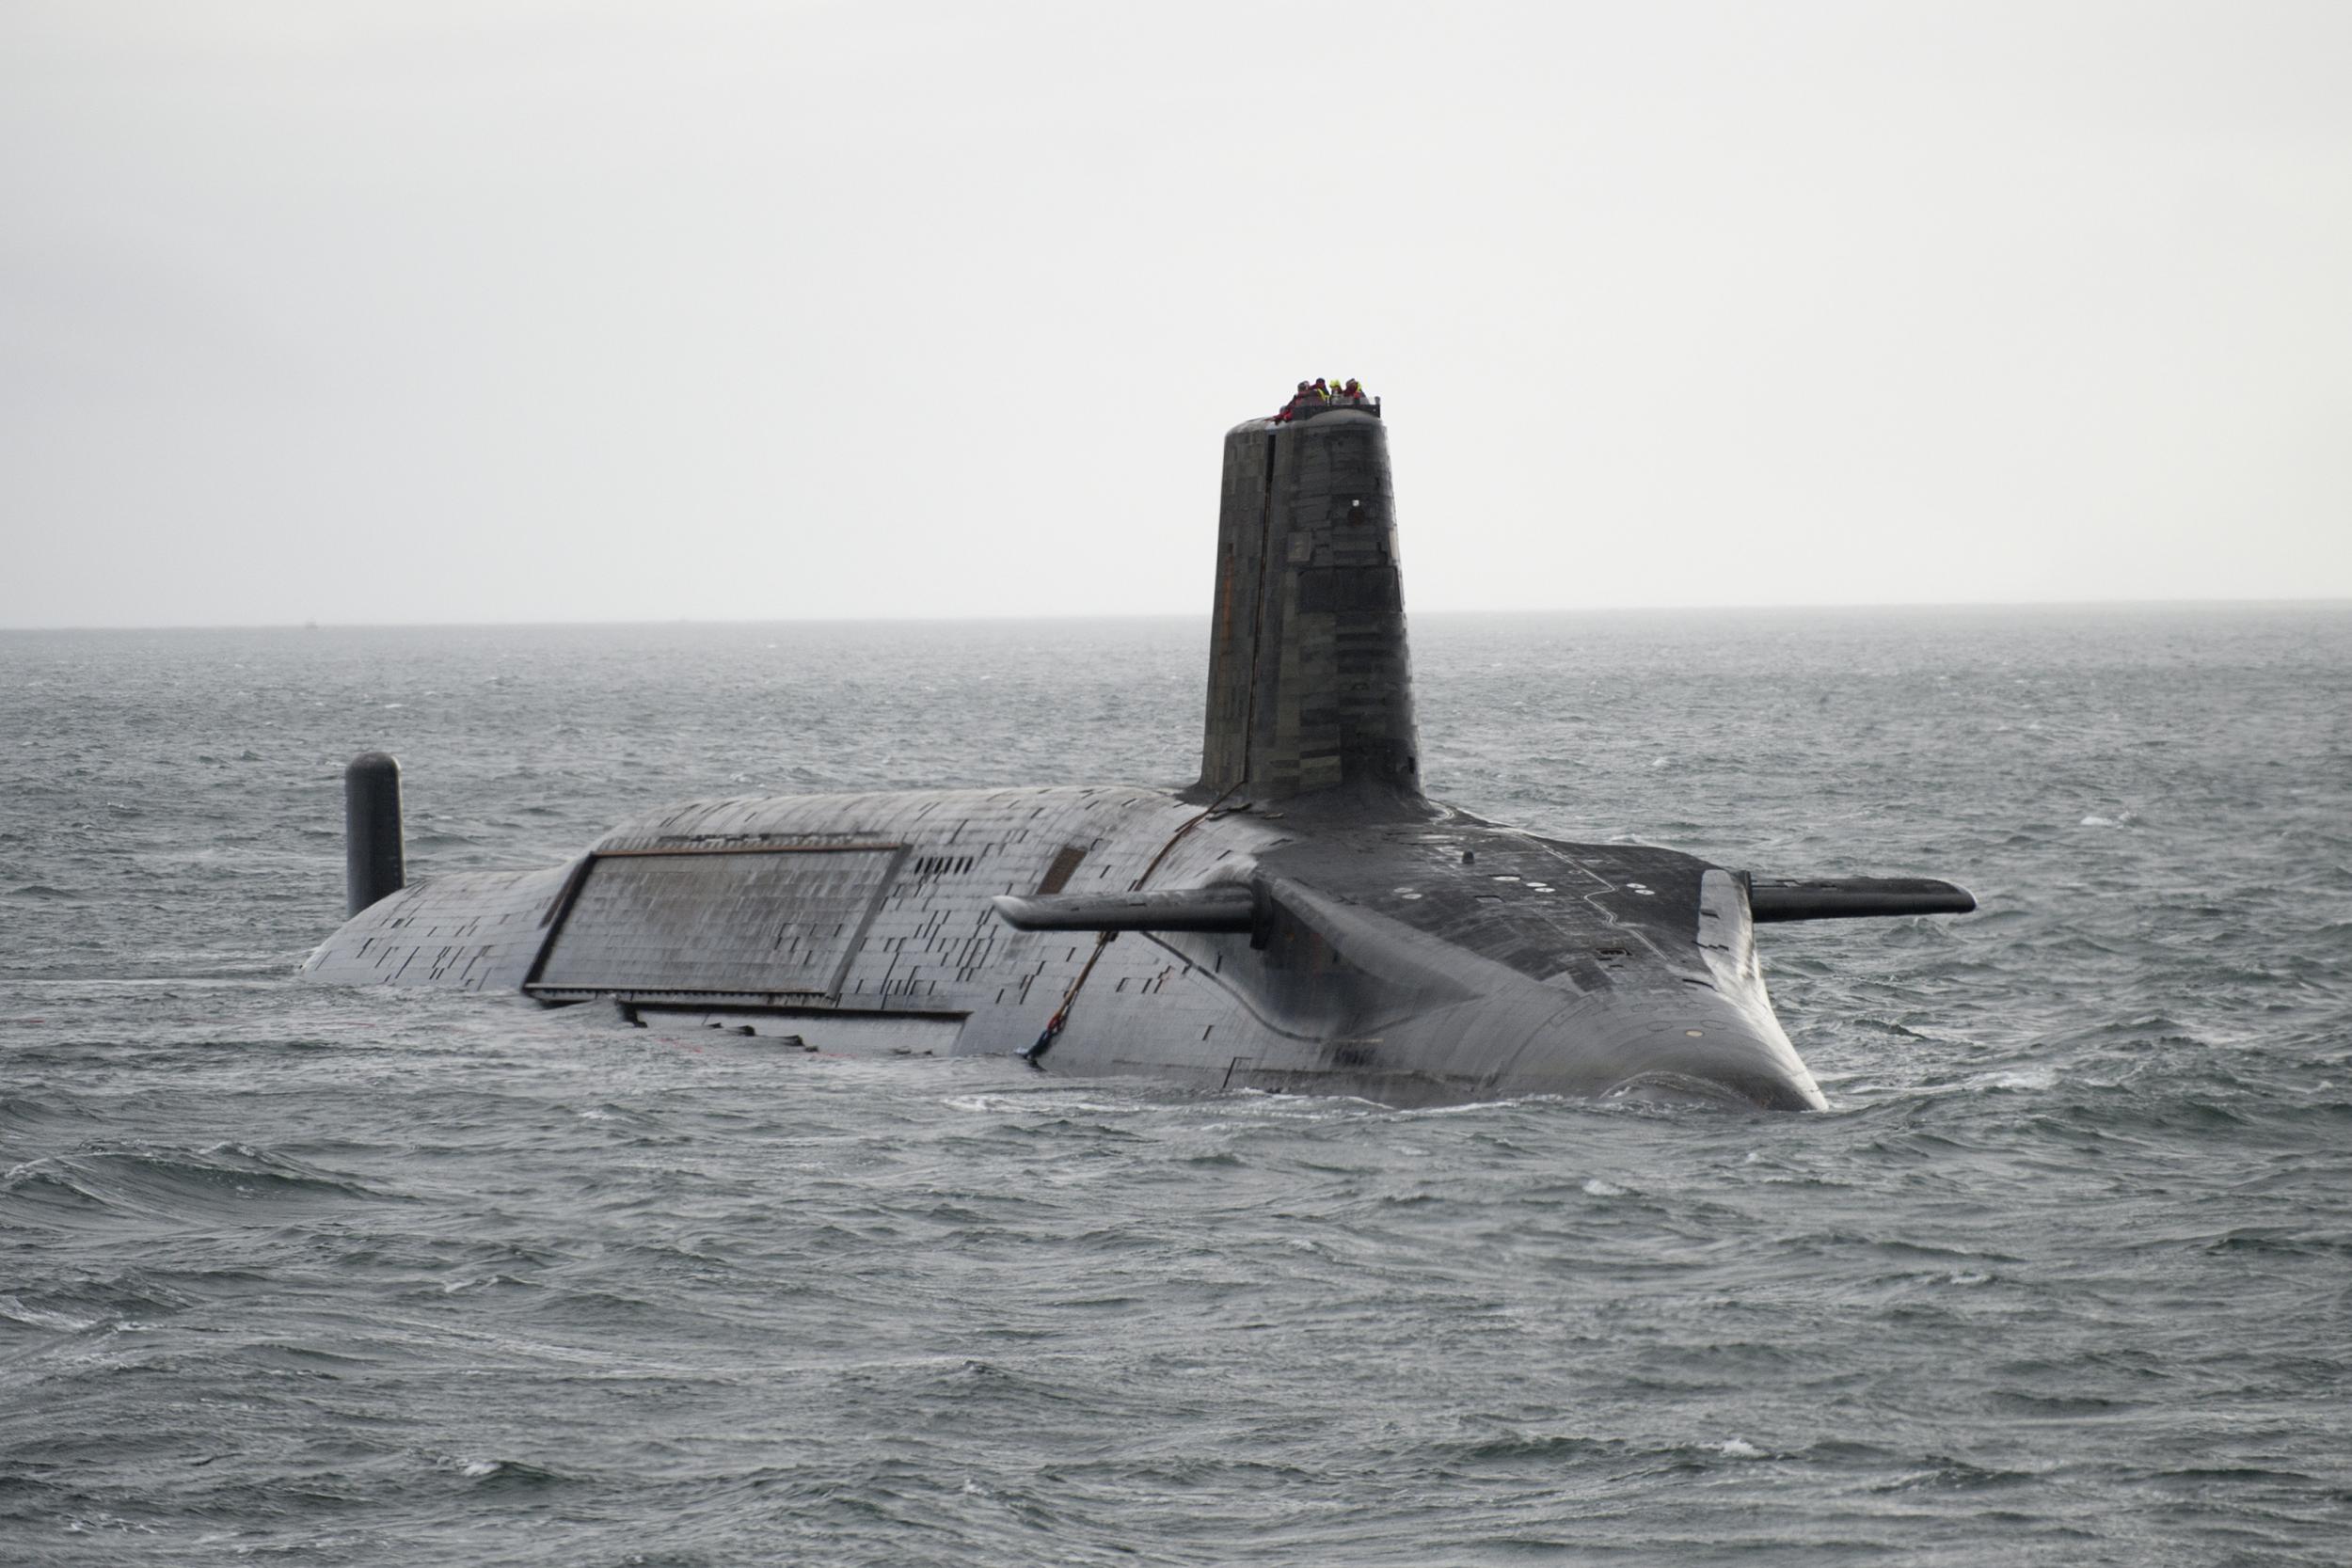 Advocates say Trident remains vital for underpinning the UK’s national security (Getty)